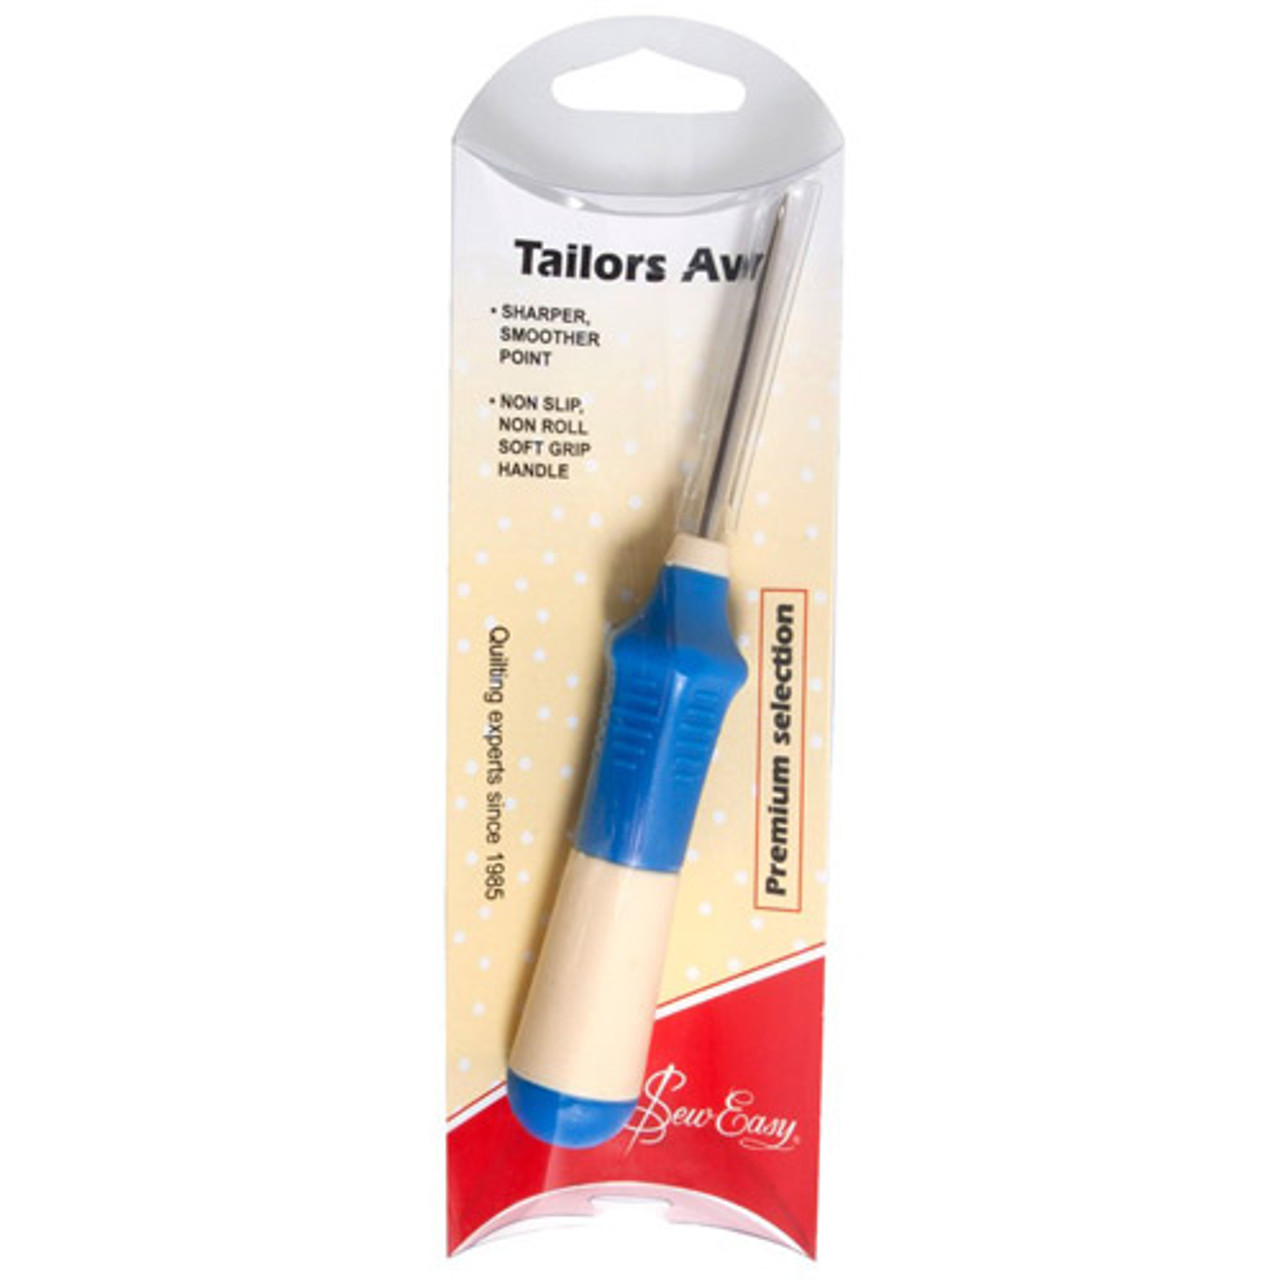 Tailors Awl - Sharper, Smoother point, non-slip, ergonomic handle